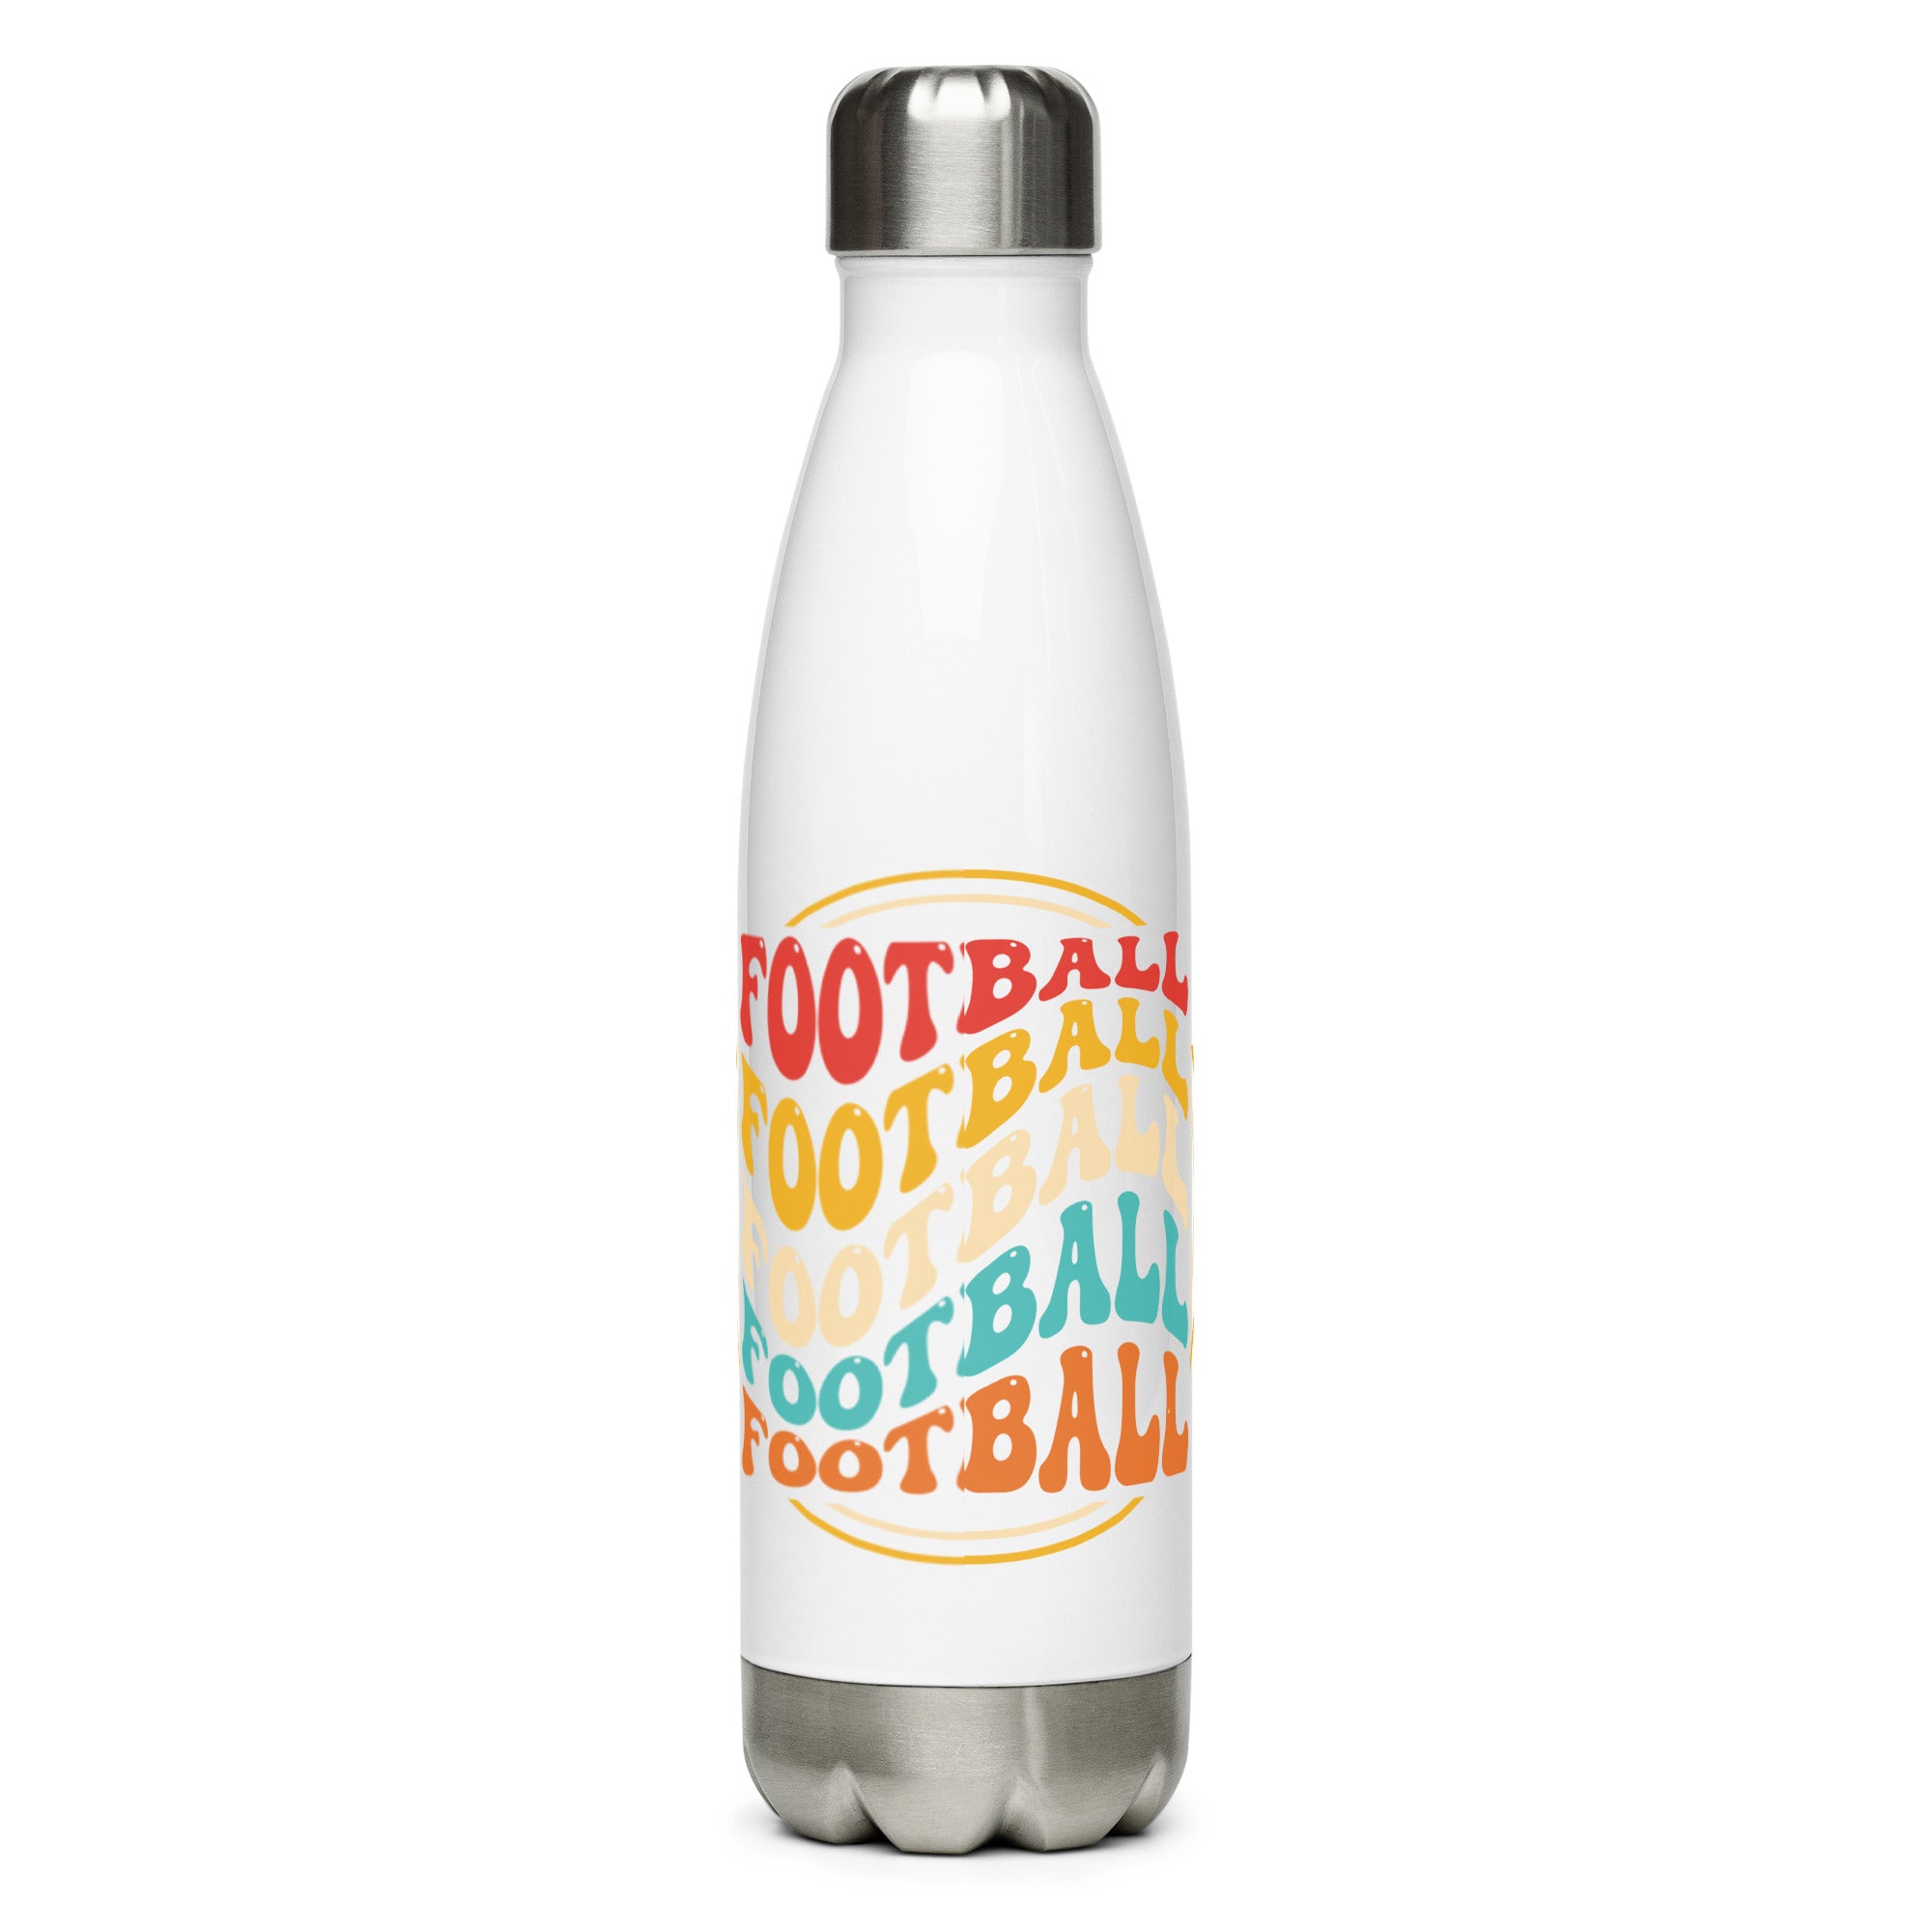 Personolized Drinking Bottle, Stainless Steel Water Bottle, Travel, Wedding, Bridesmaid Gifts,